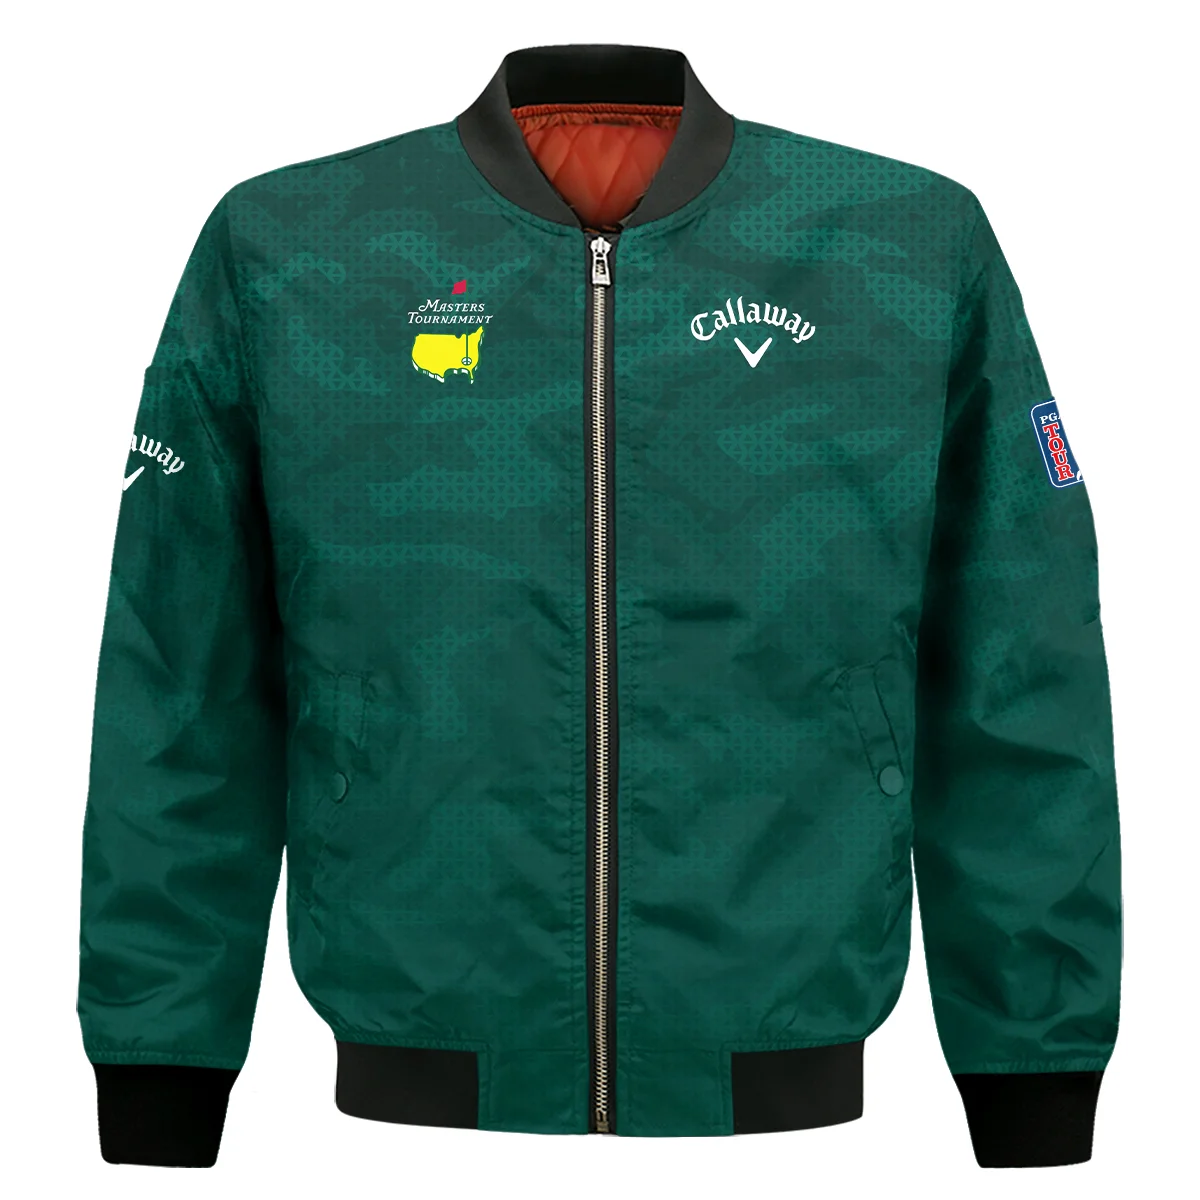 Masters Tournament Callaway Camo Sport Green Abstract Bomber Jacket Style Classic Bomber Jacket